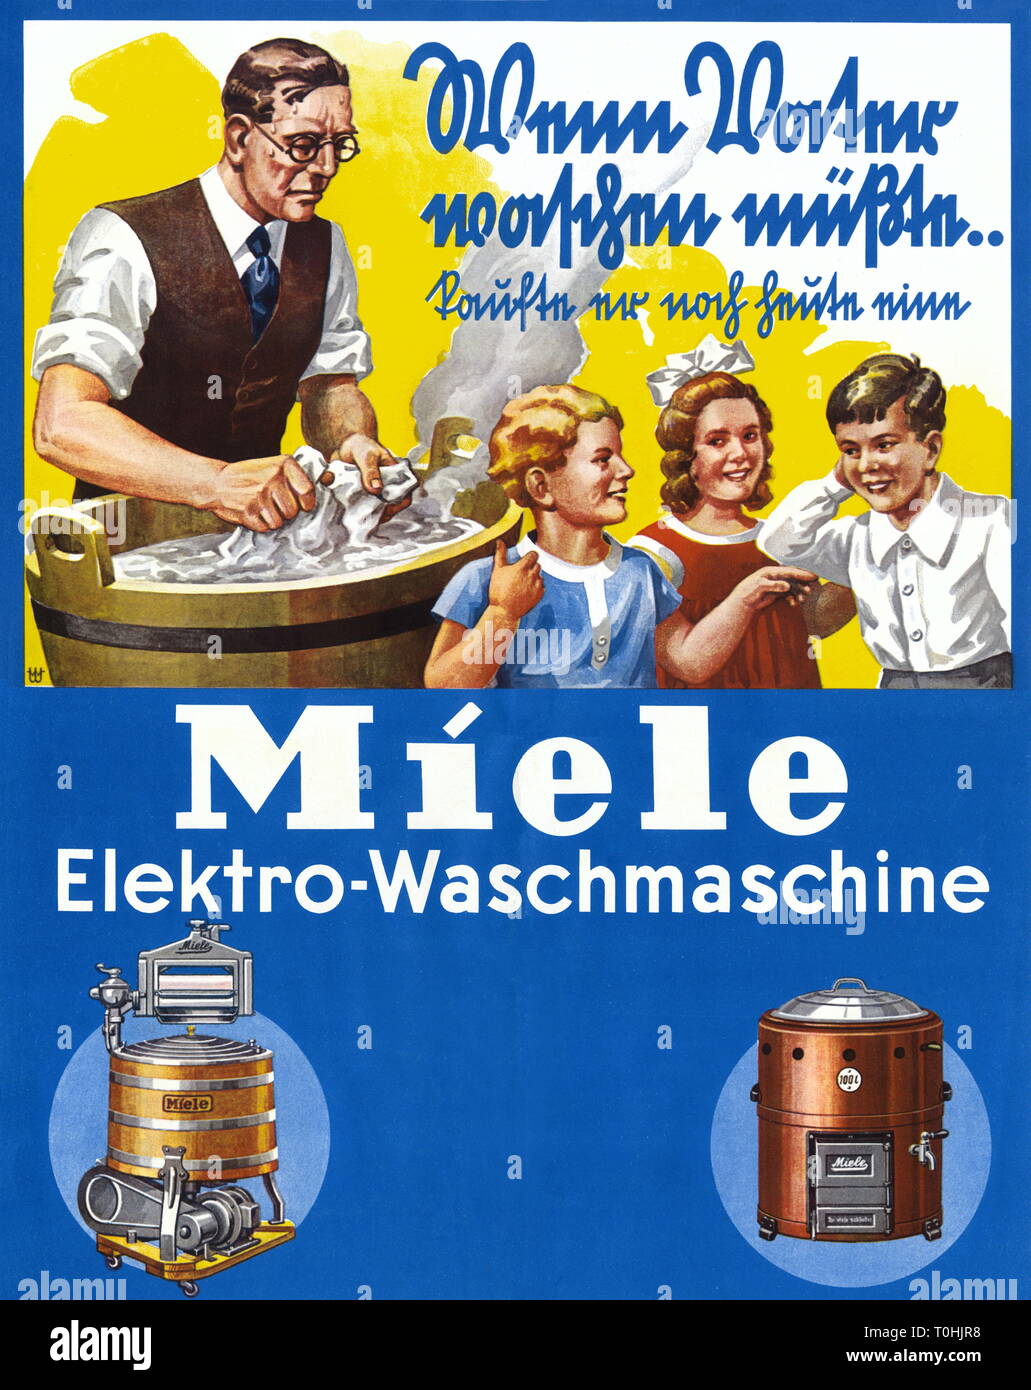 advertising, household, Miele, electric washing machine, slogan: 'Wenn Vater waschen muesste kaufte er noch heute eine Miele Elektro Waschmaschine', founded 1899, advertising poster, Guetersloh in Westphalia, Germany, circa 1932, Additional-Rights-Clearance-Info-Not-Available Stock Photo